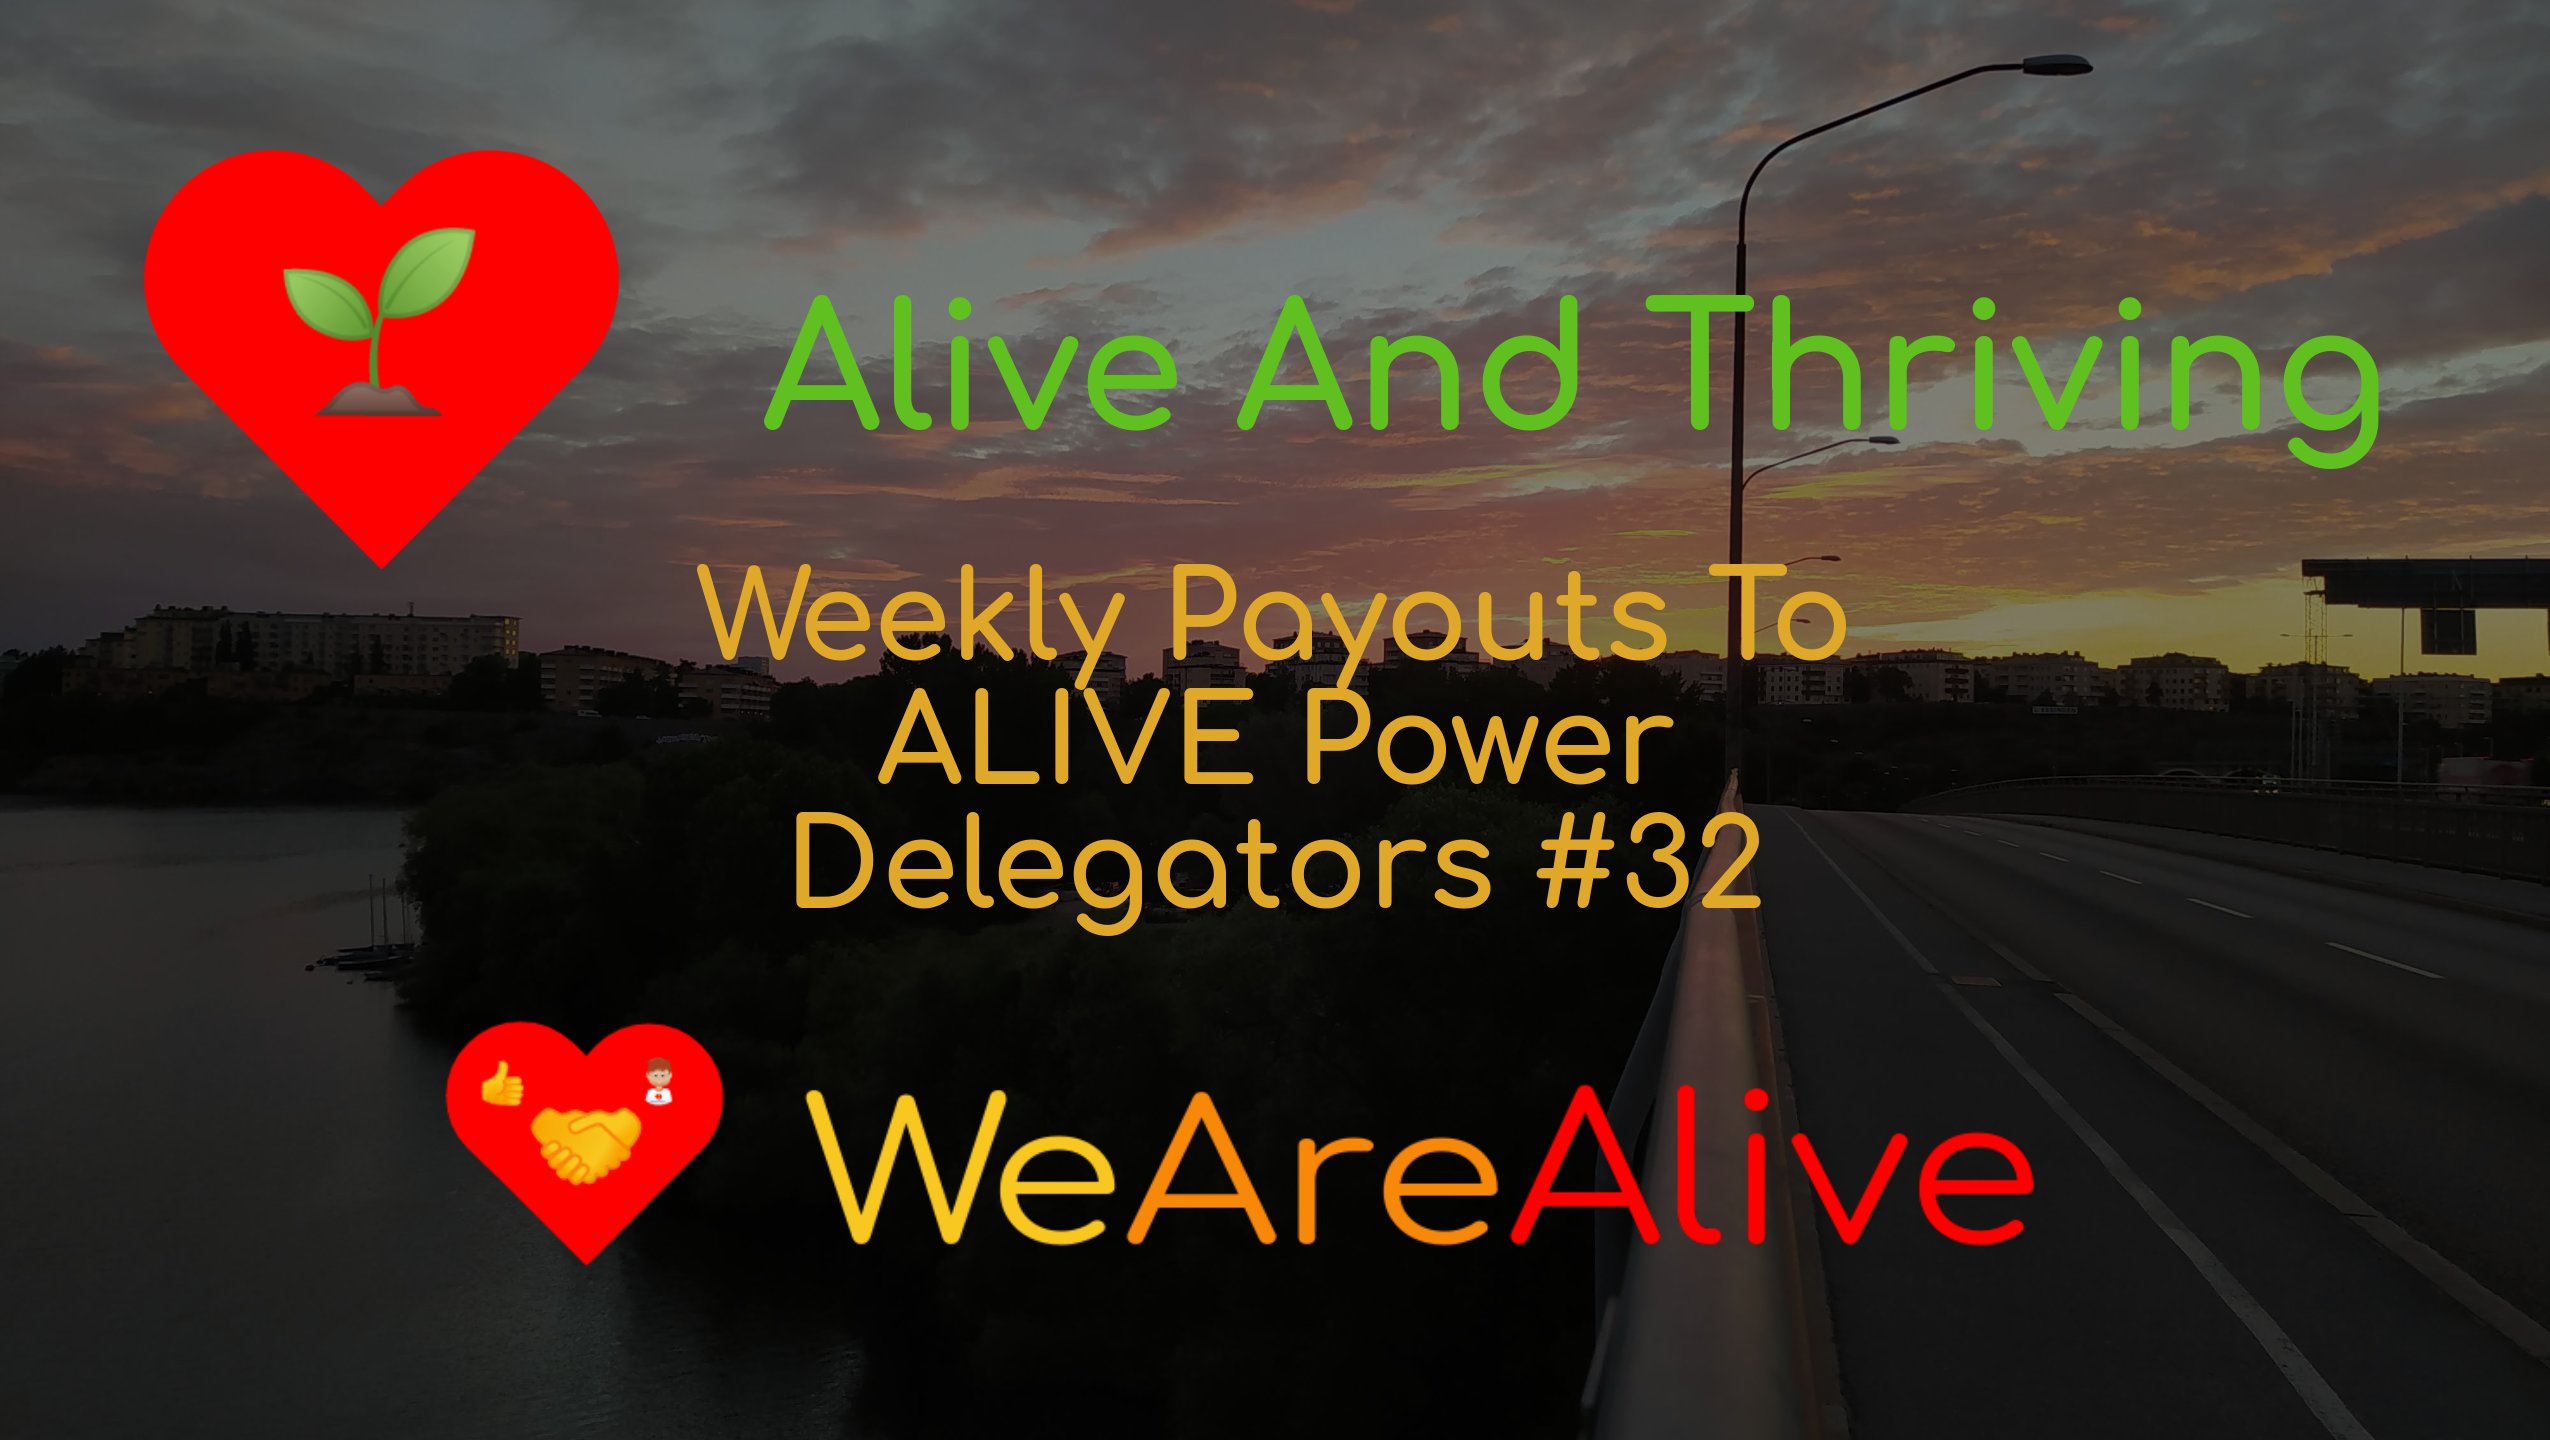 @wearealive/alive-and-thriving-weekly-payouts-to-alive-power-delegators-32